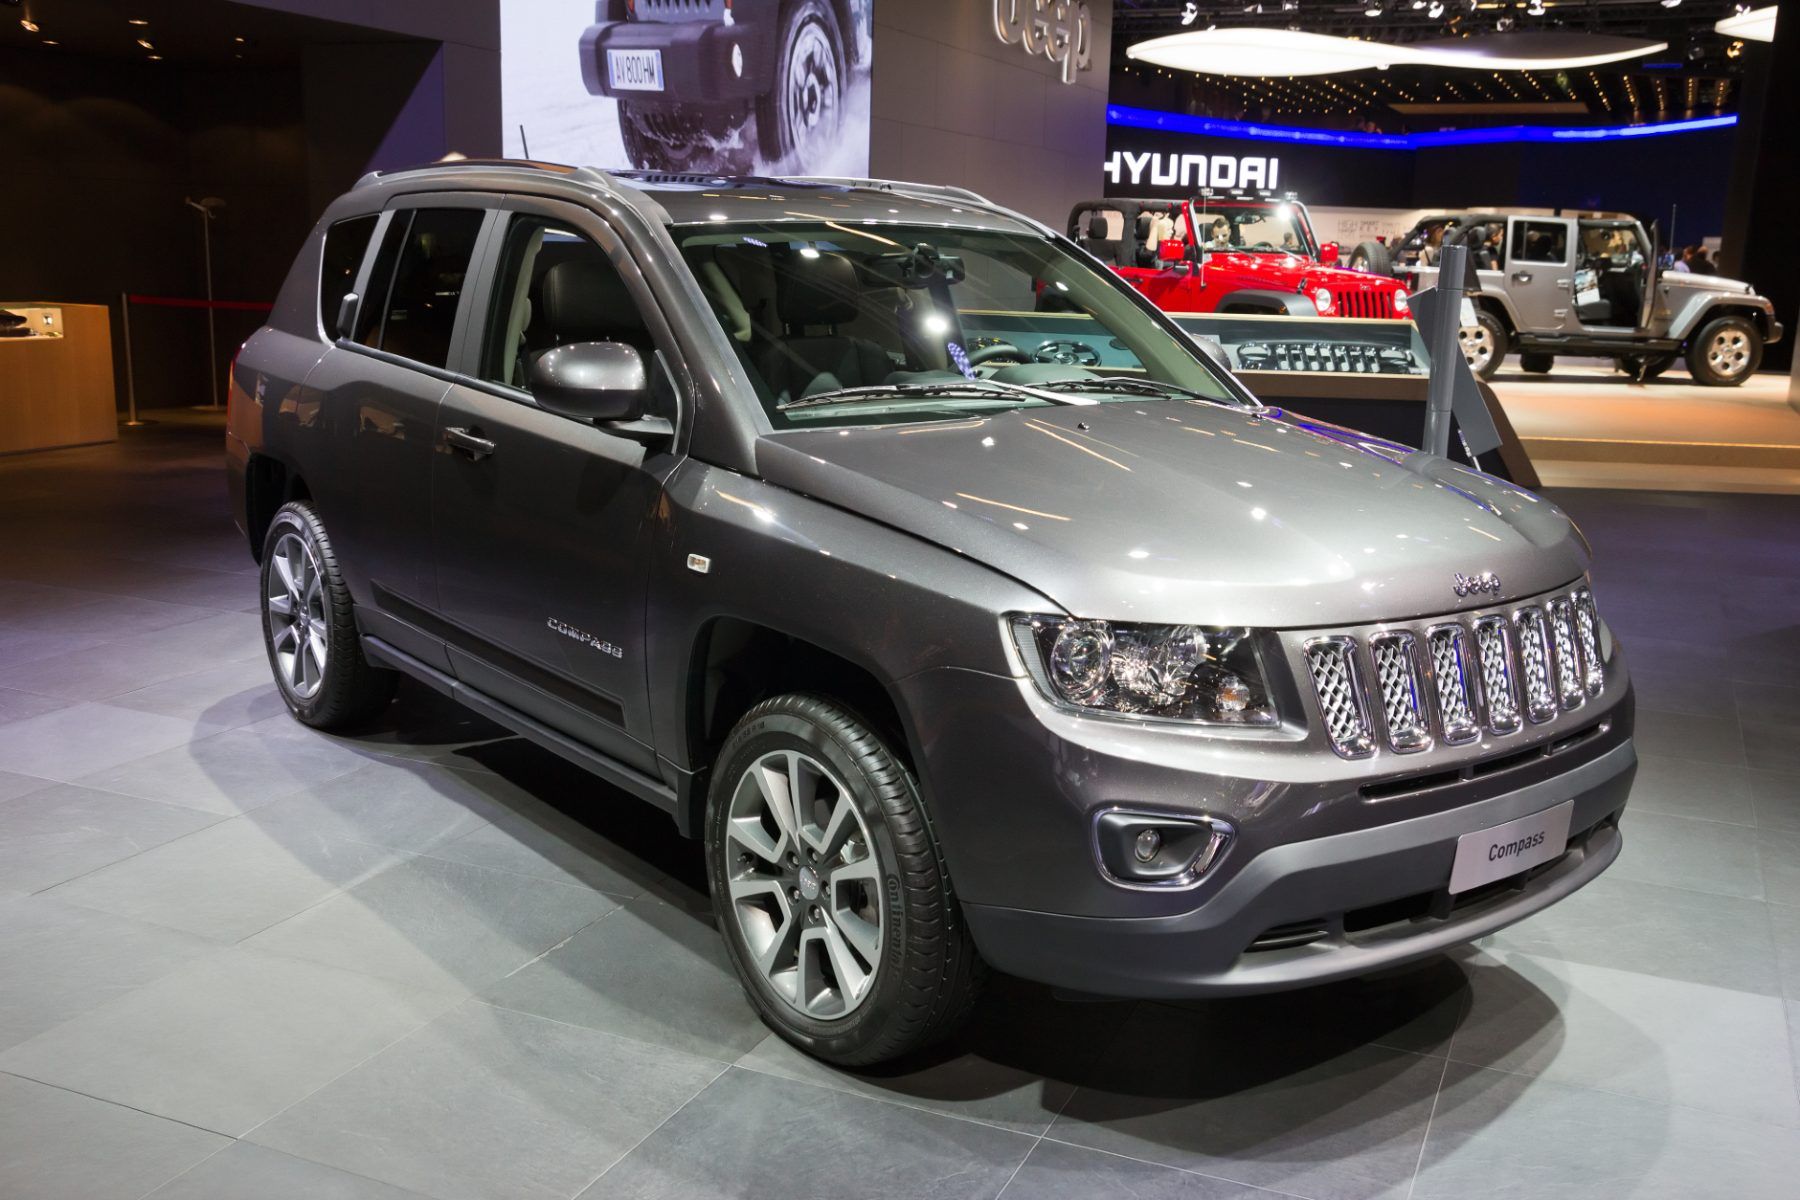 Jeep Compass Class Action Lawsuit Says Oil Consumed At 'Furious Pace